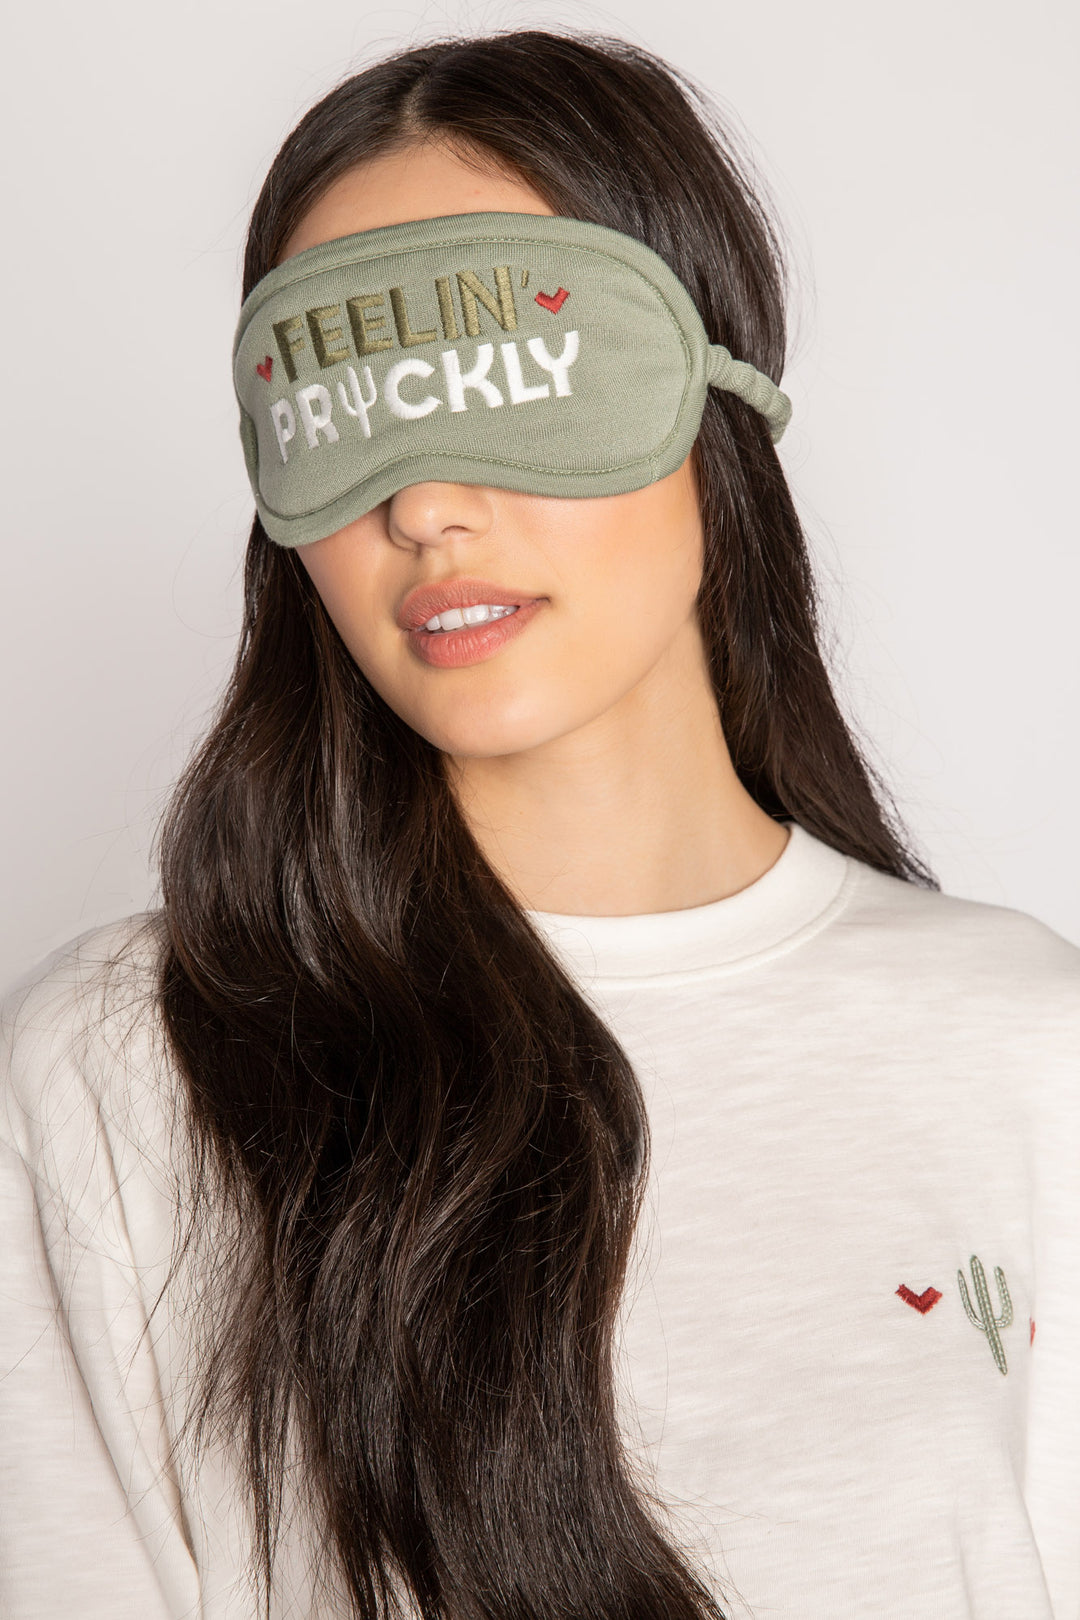 Olive cozy sleep mask with 'Feelin Prickly' embroidery on front. Gathered elastic band for fit. (7231888097380)